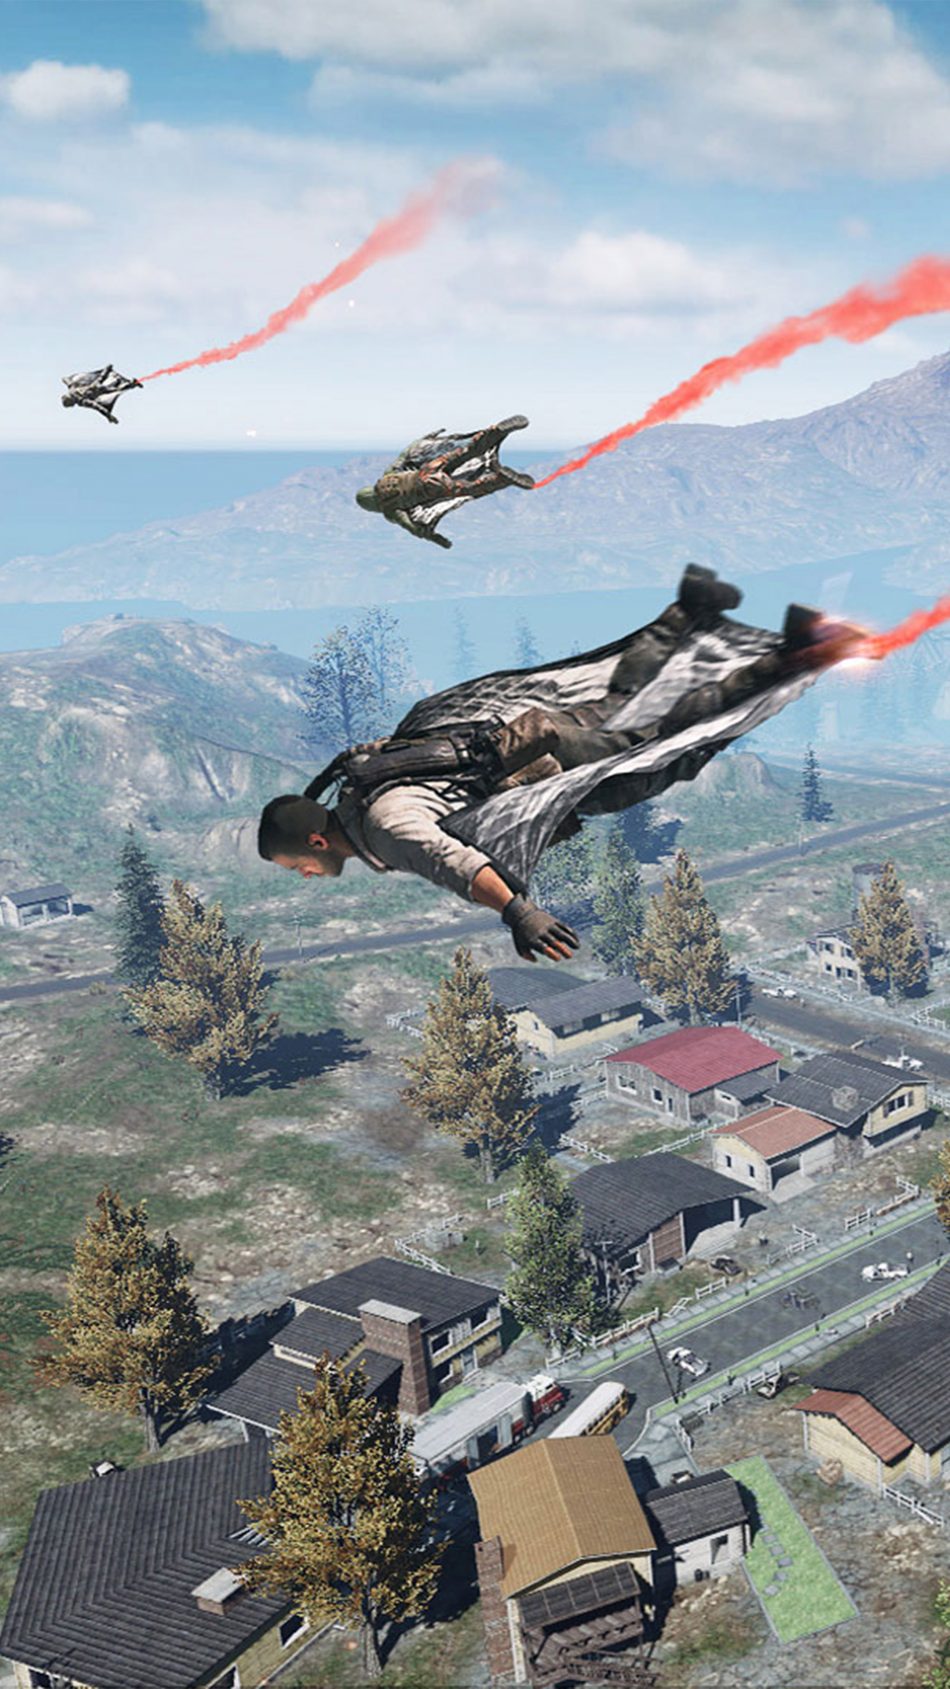 Jump From The Plane Call of Duty Mobile 4K Ultra HD Mobile Wallpaper